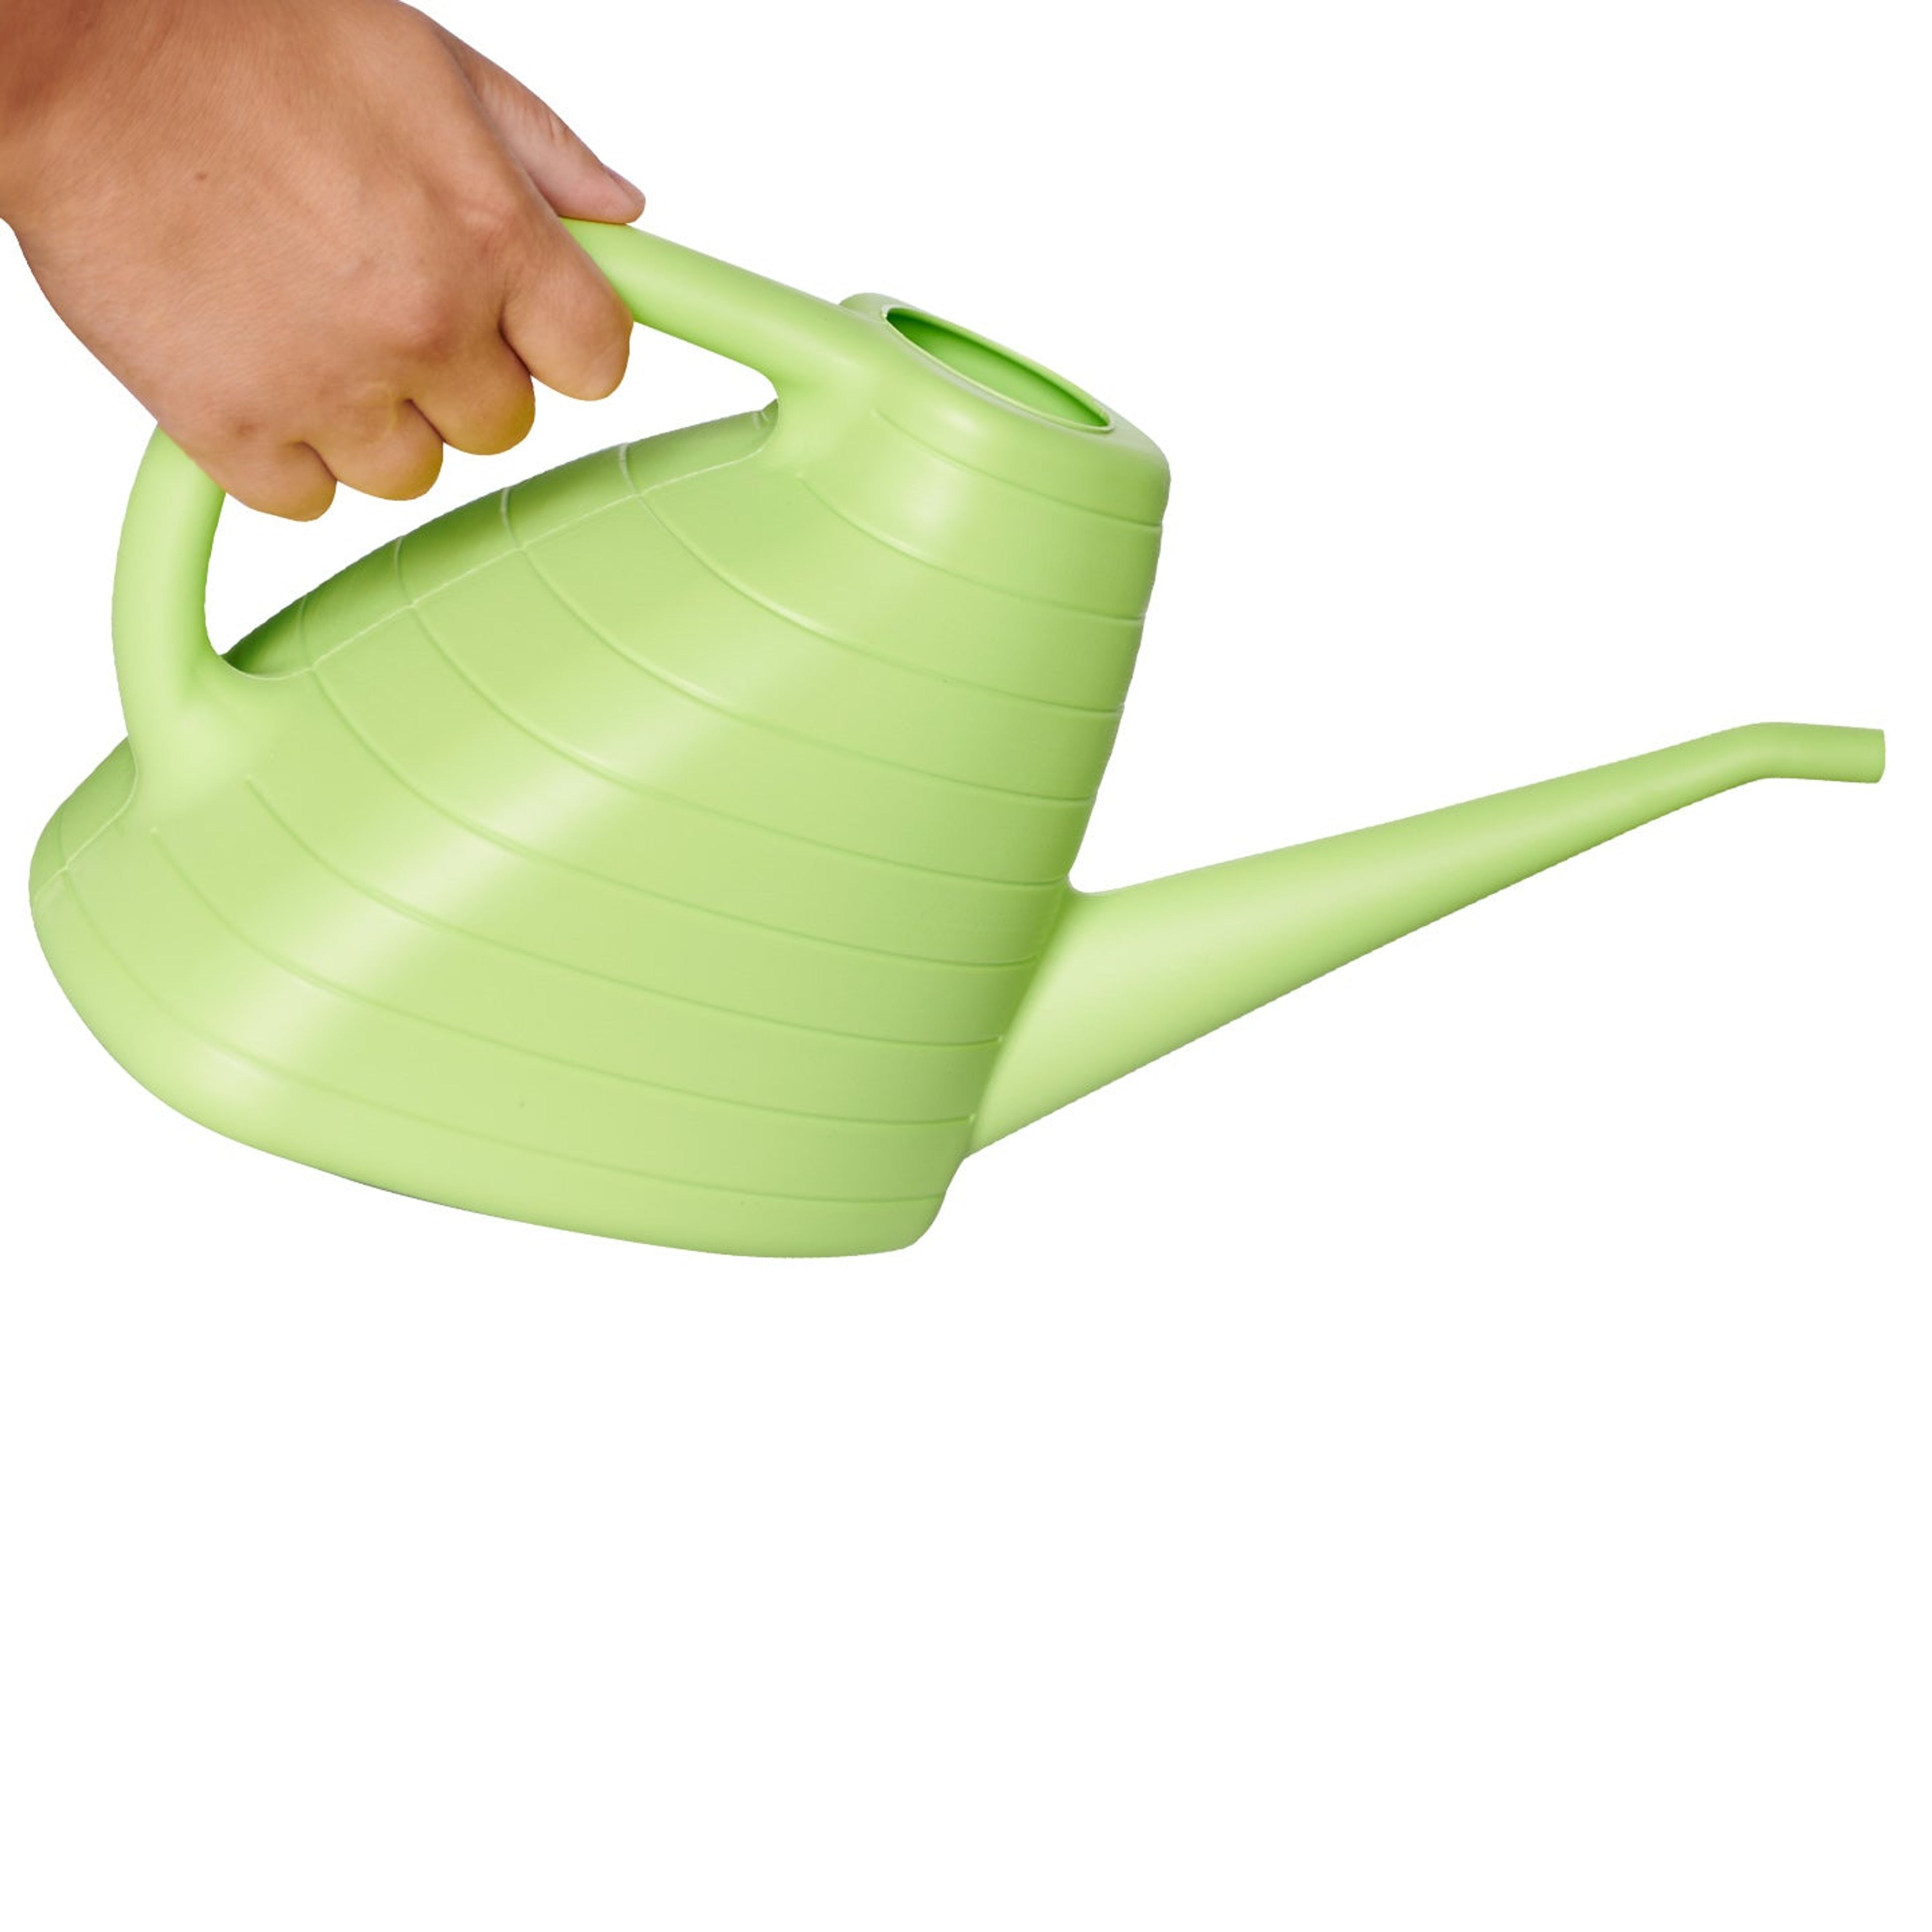 Eos Watering Can